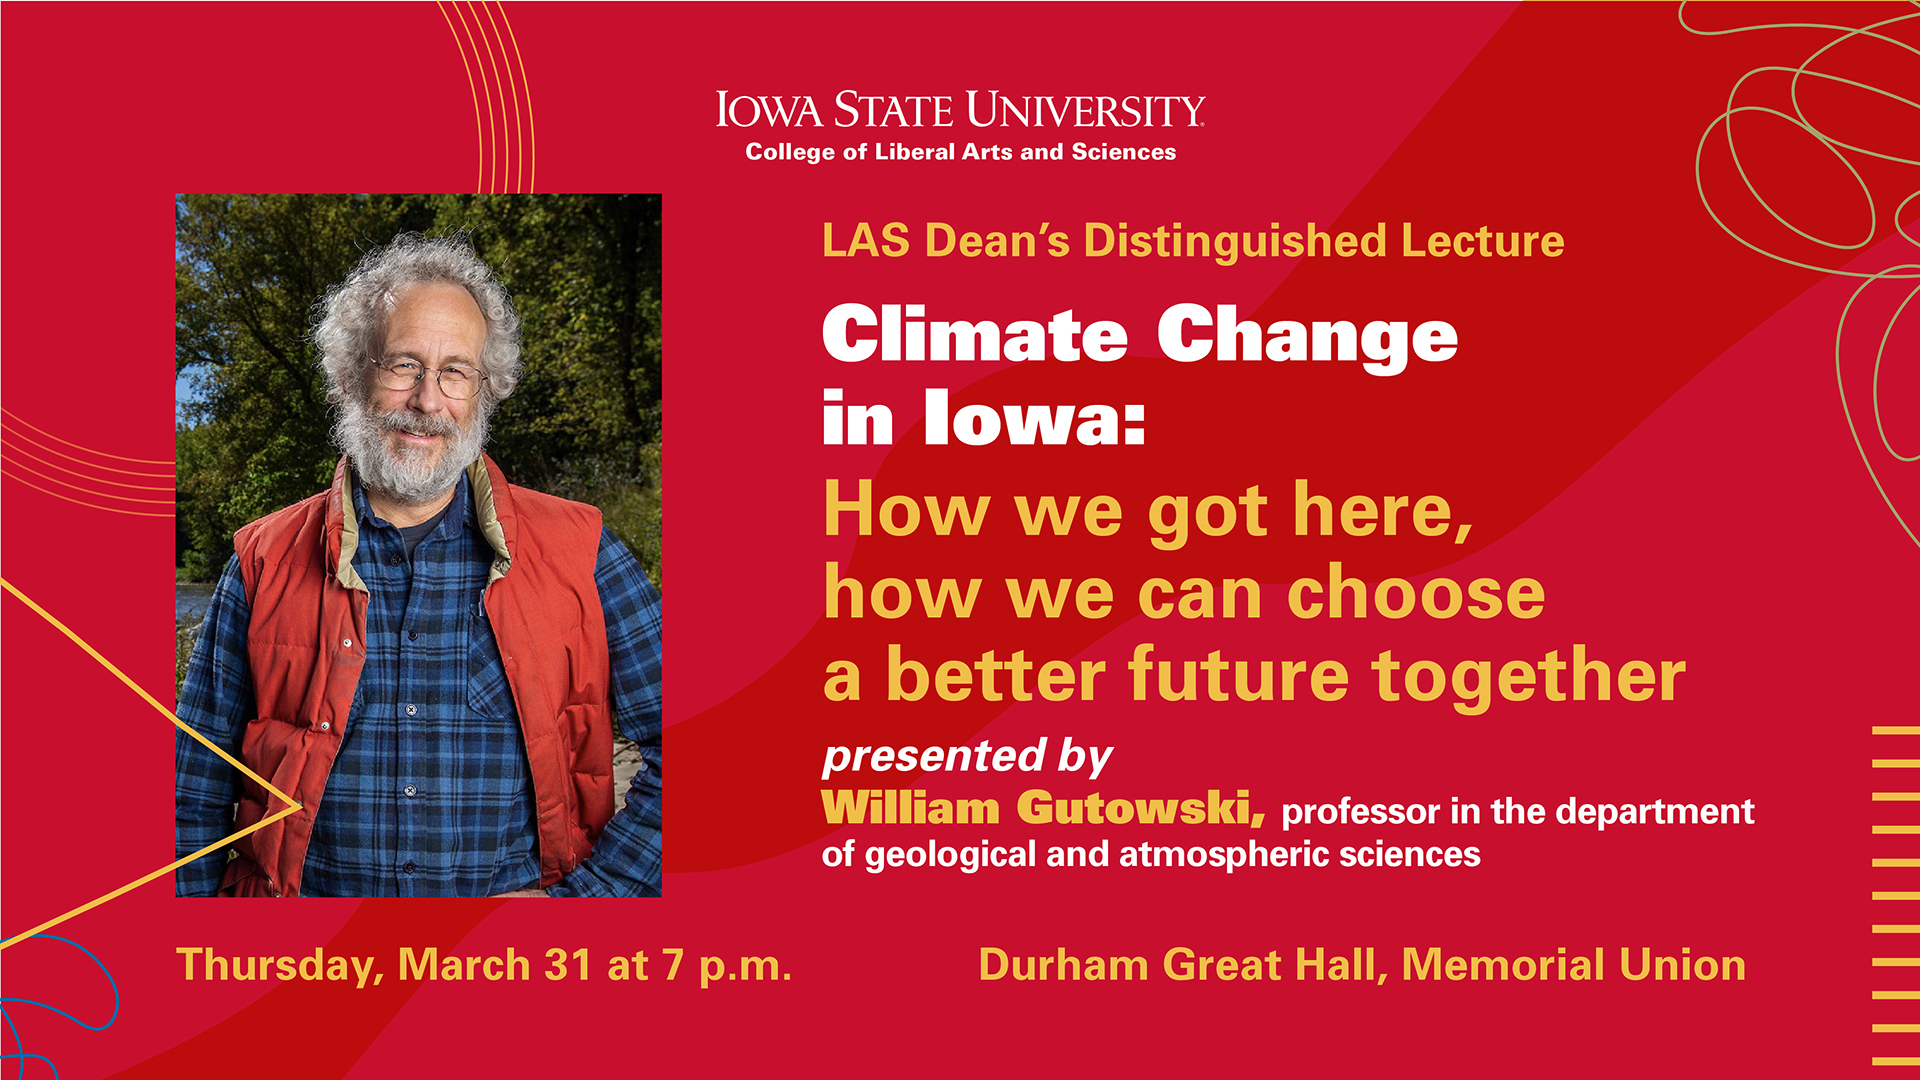 Bill Gutowski will deliver LAS Dean's Distinguished Lecture on March 31 at 7:00 p.m.